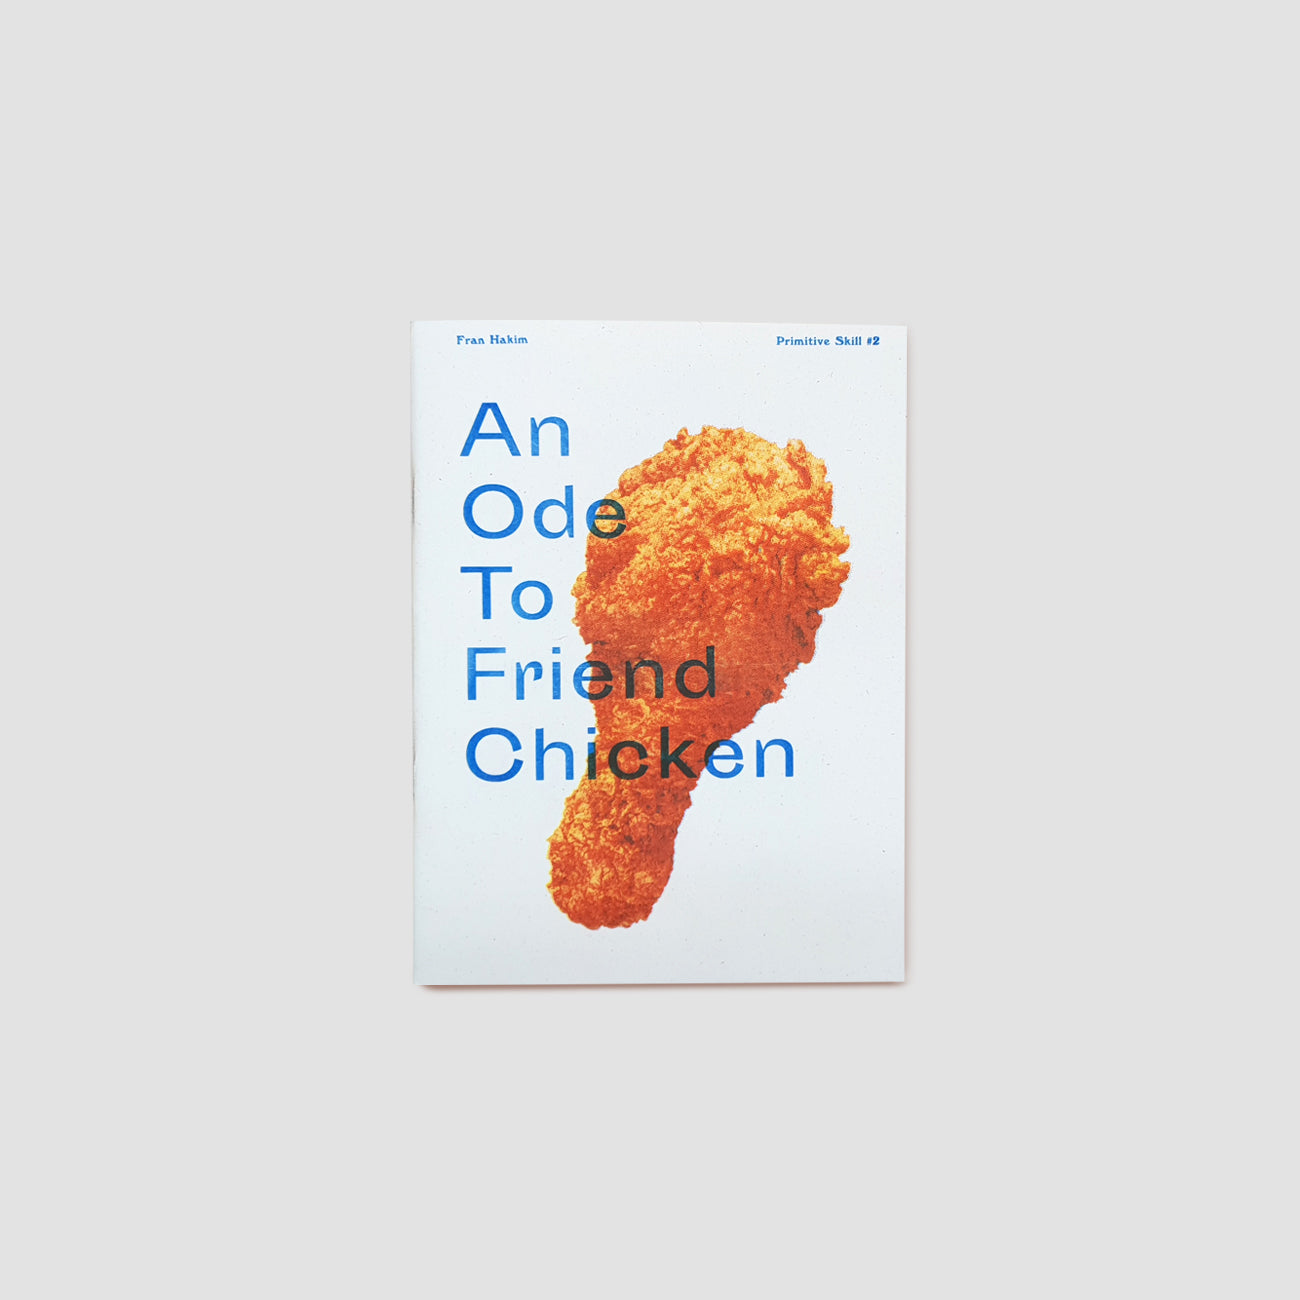 An Ode To Friend Chicken from Fran Hakim published by Binatang Press